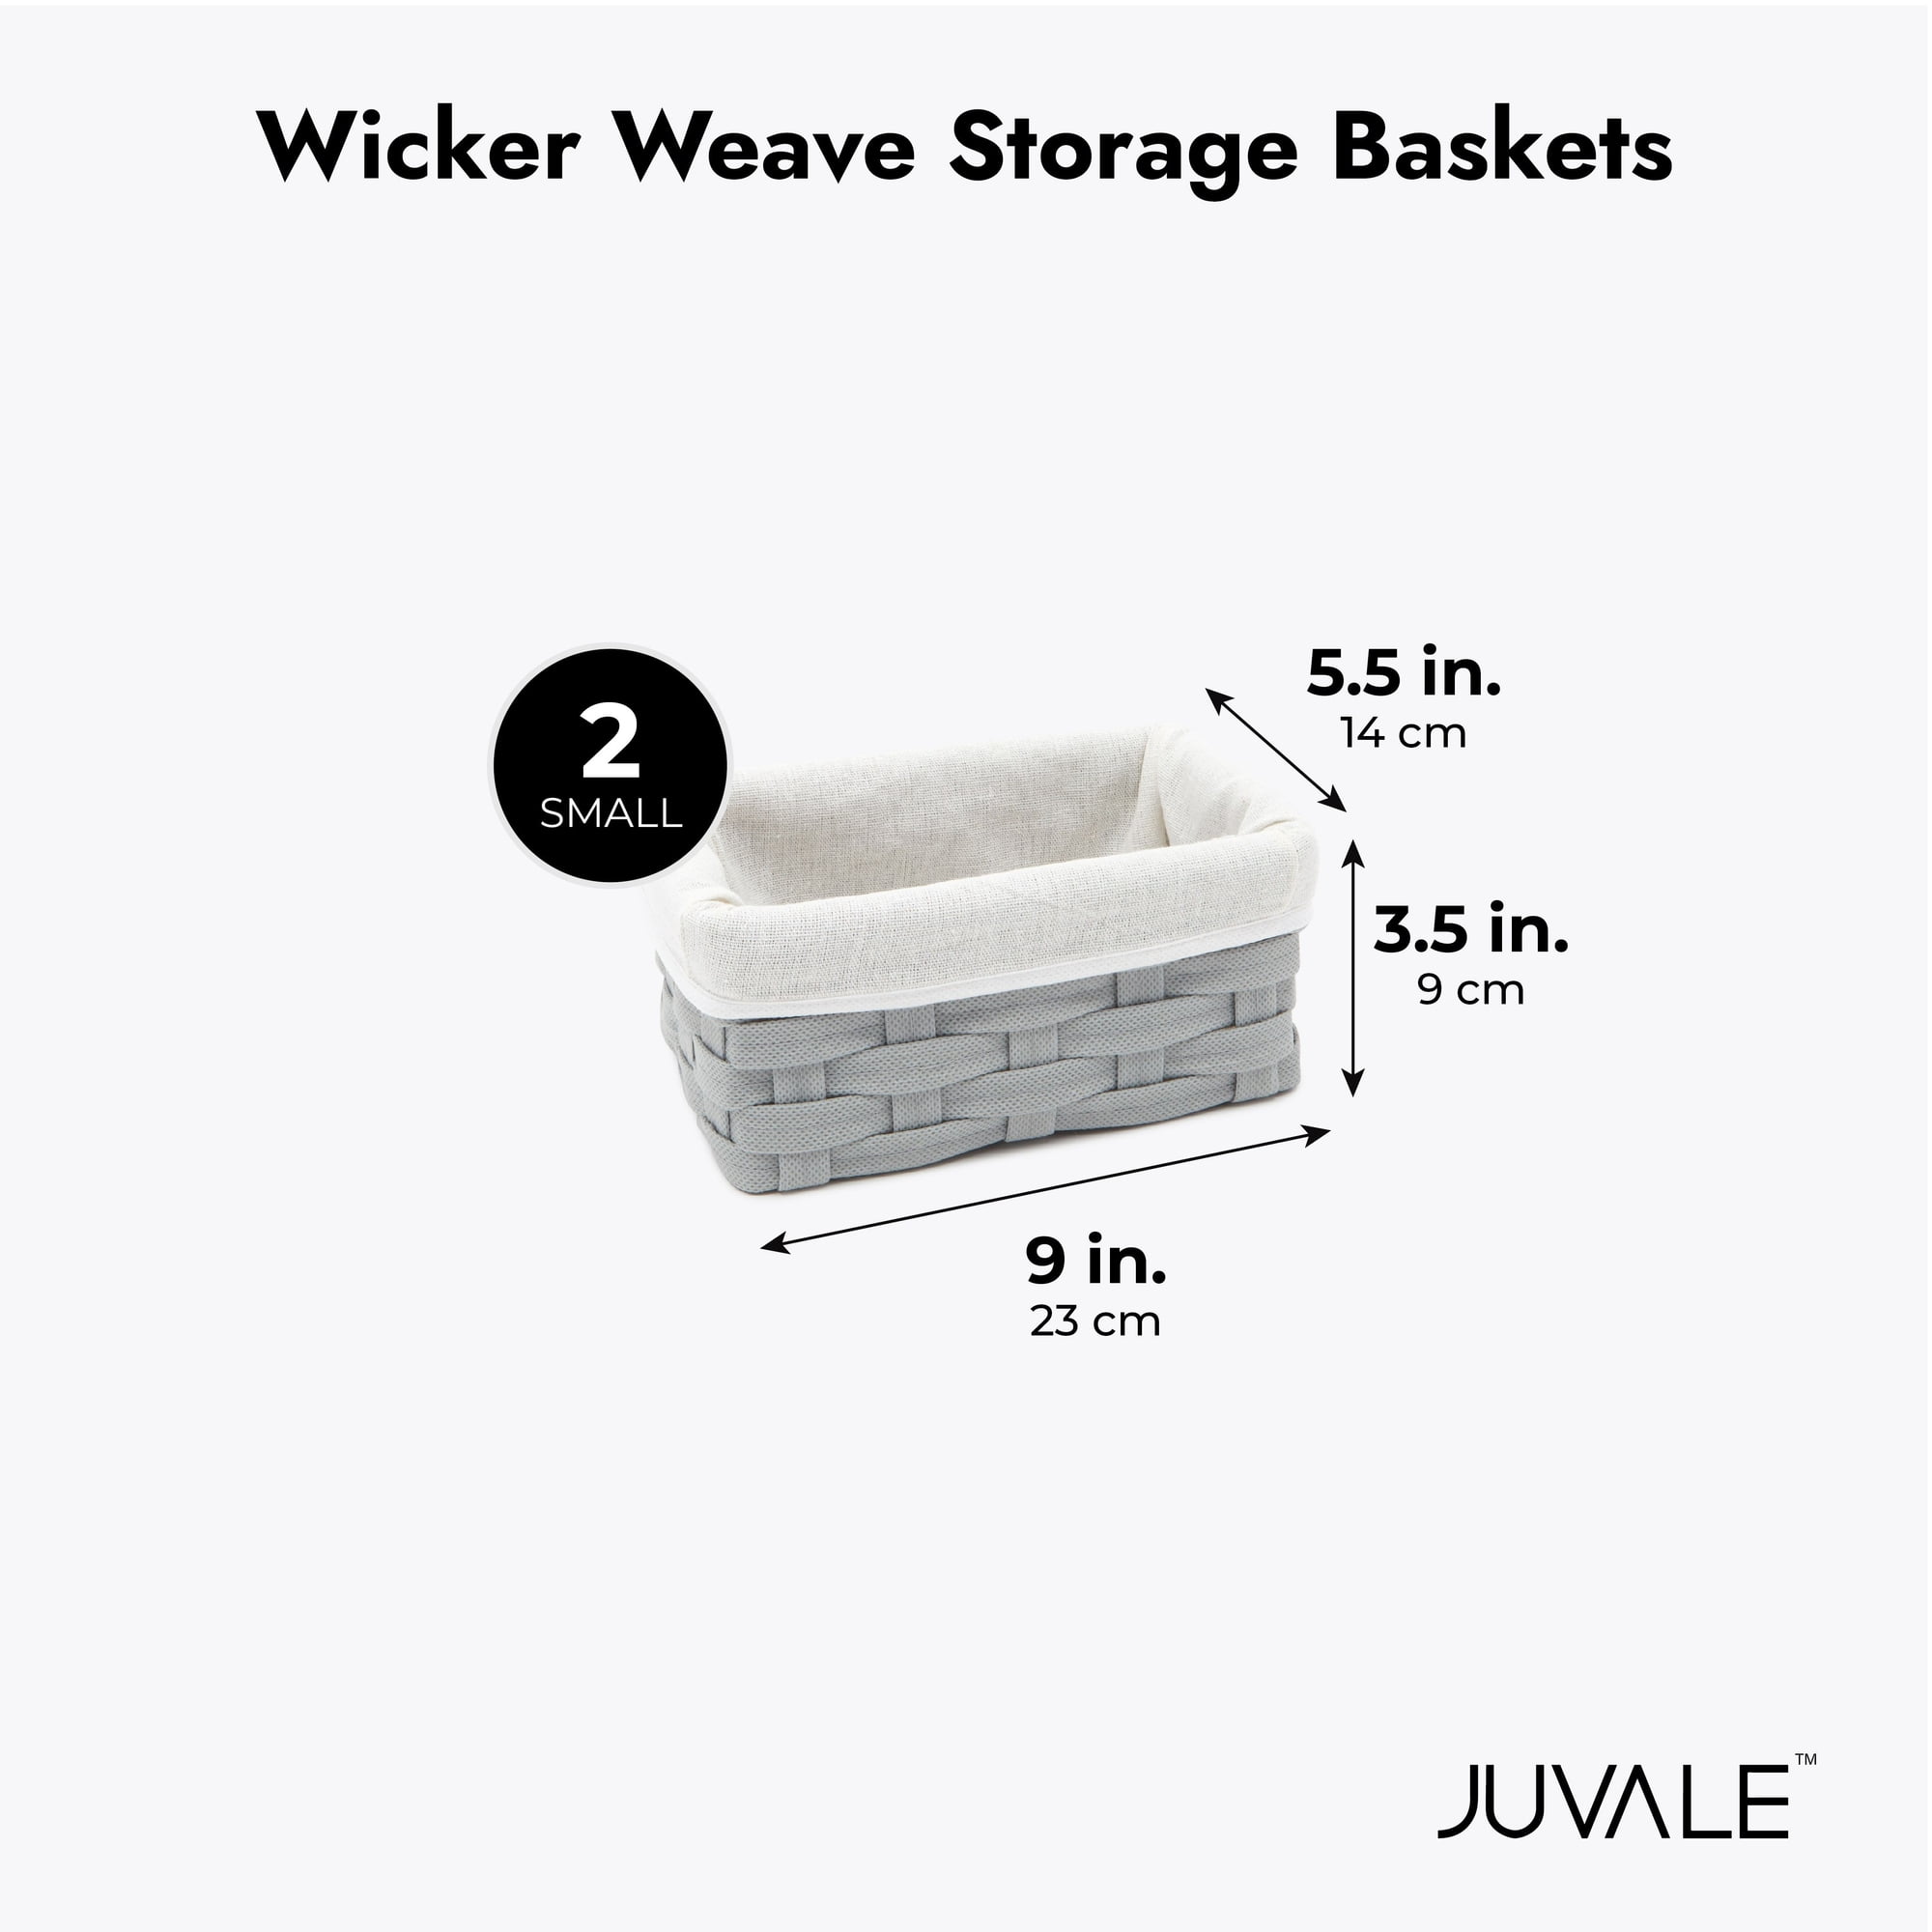 5 Piece Grey Wicker Baskets with Cloth Lining for Storage, Lined